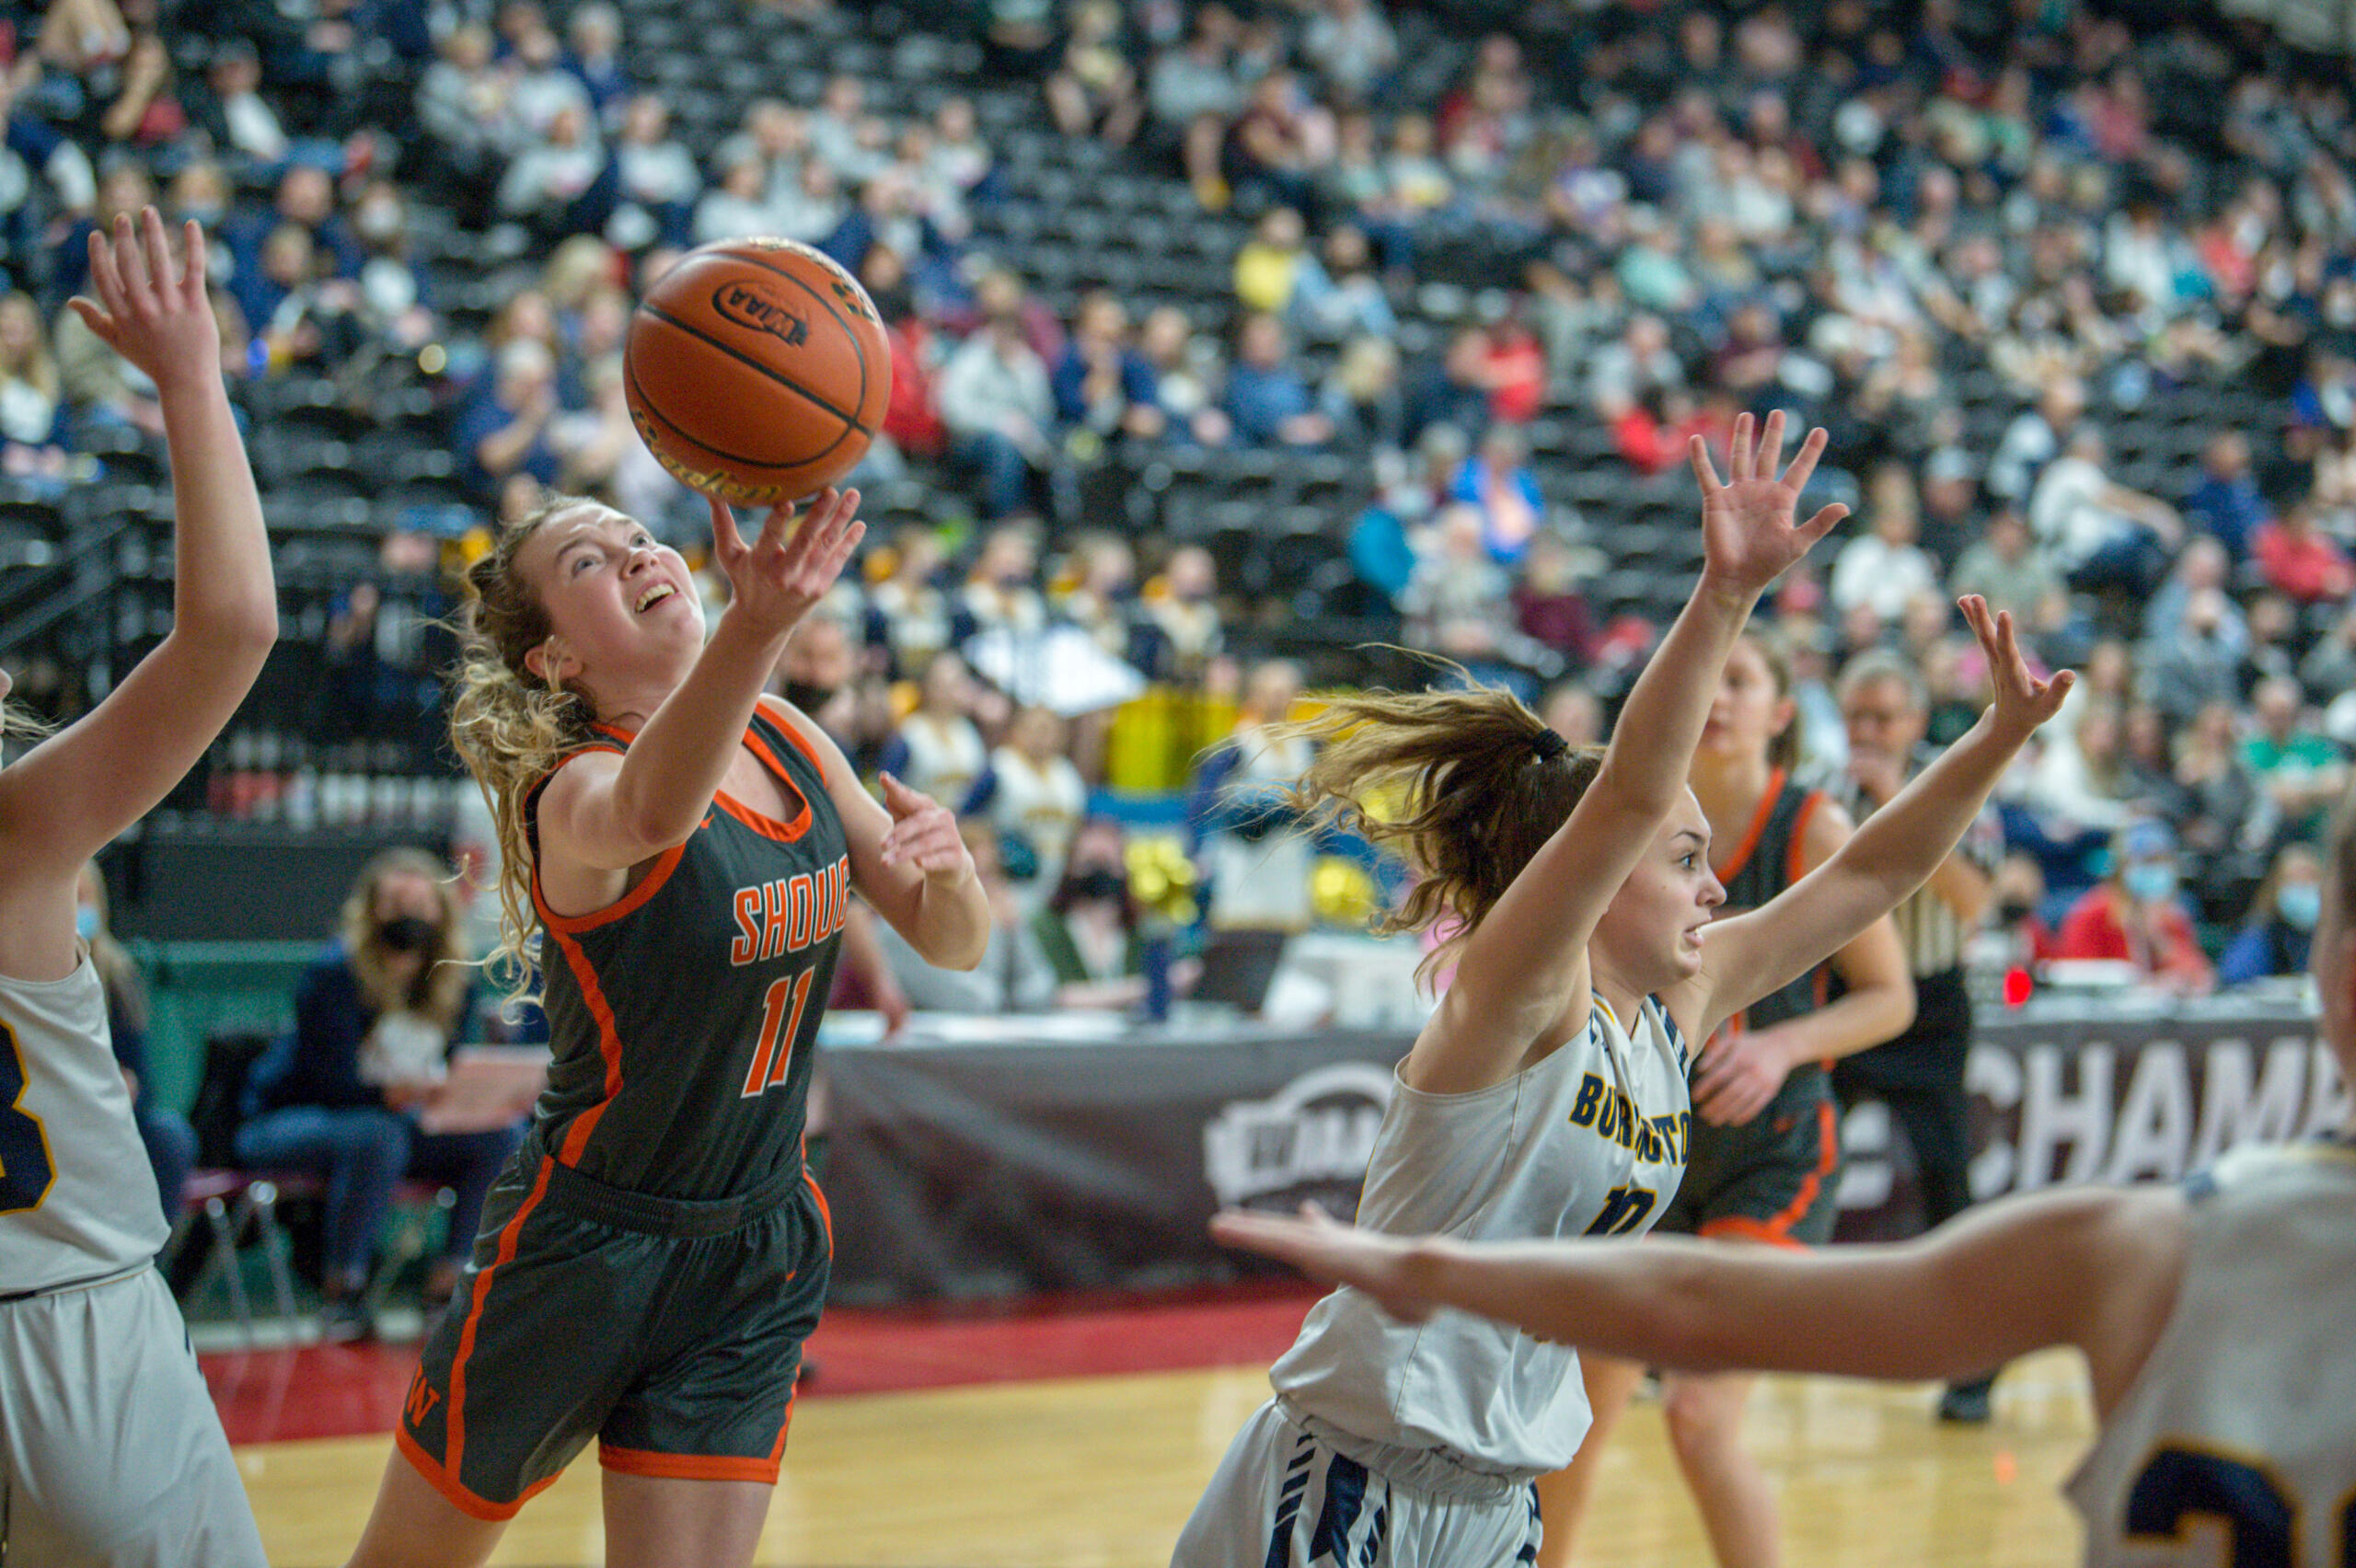 Washougal’s Samantha Mederos drives to the hoop in a Class 2A girls basketball state quarterfinal game against Burlington-Edison on Thursday, March 3, 2022 in Yakima.